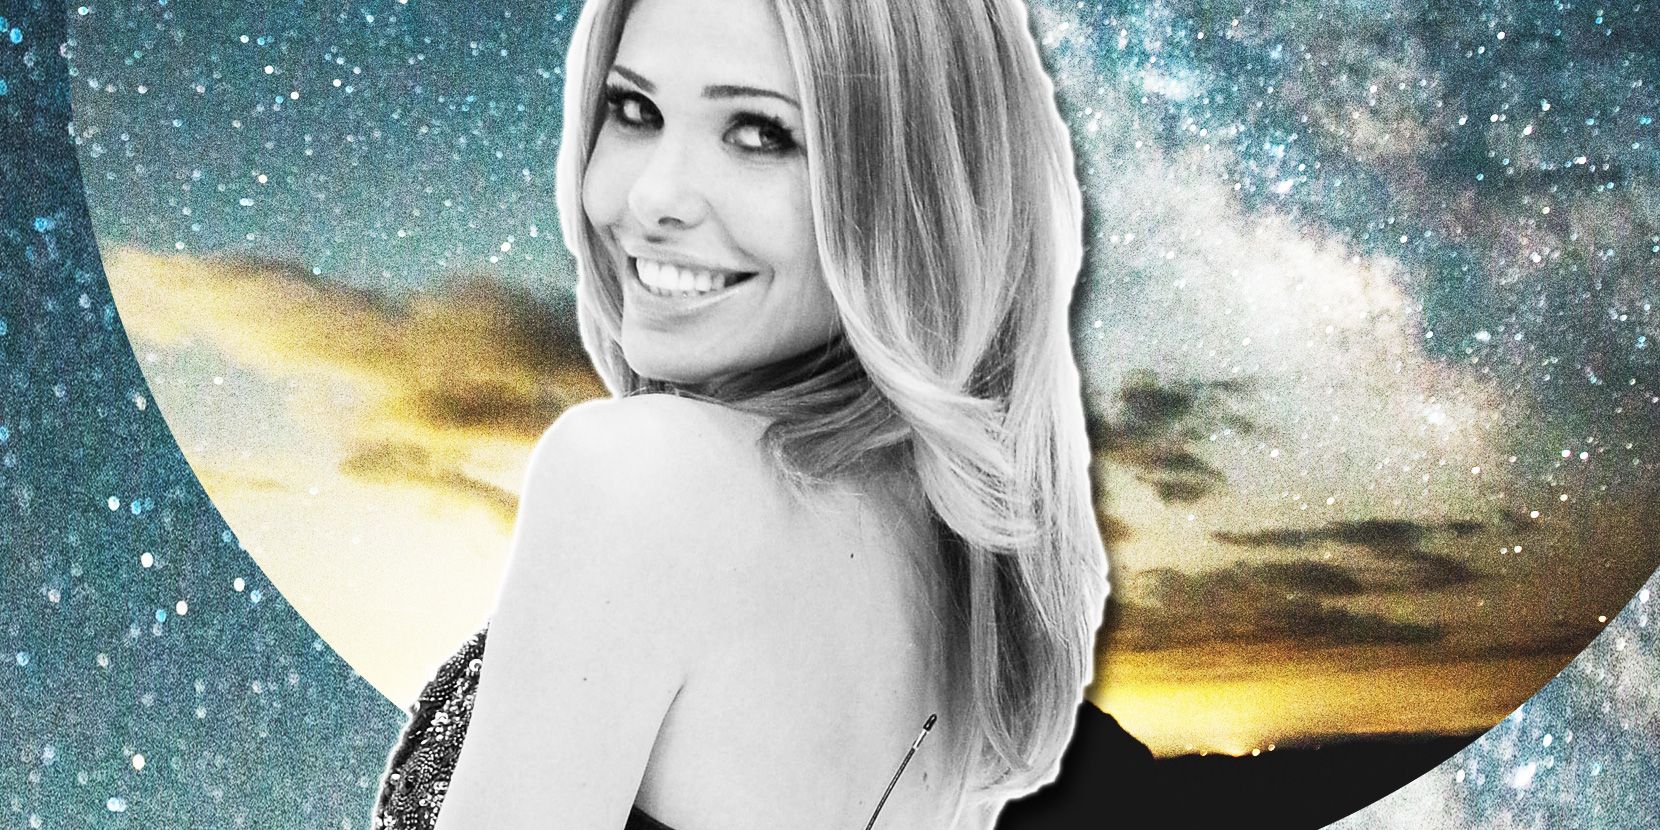 Beauty, Sky, Cool, Blond, Photography, Smile, Illustration, Space, Photo shoot, World, 